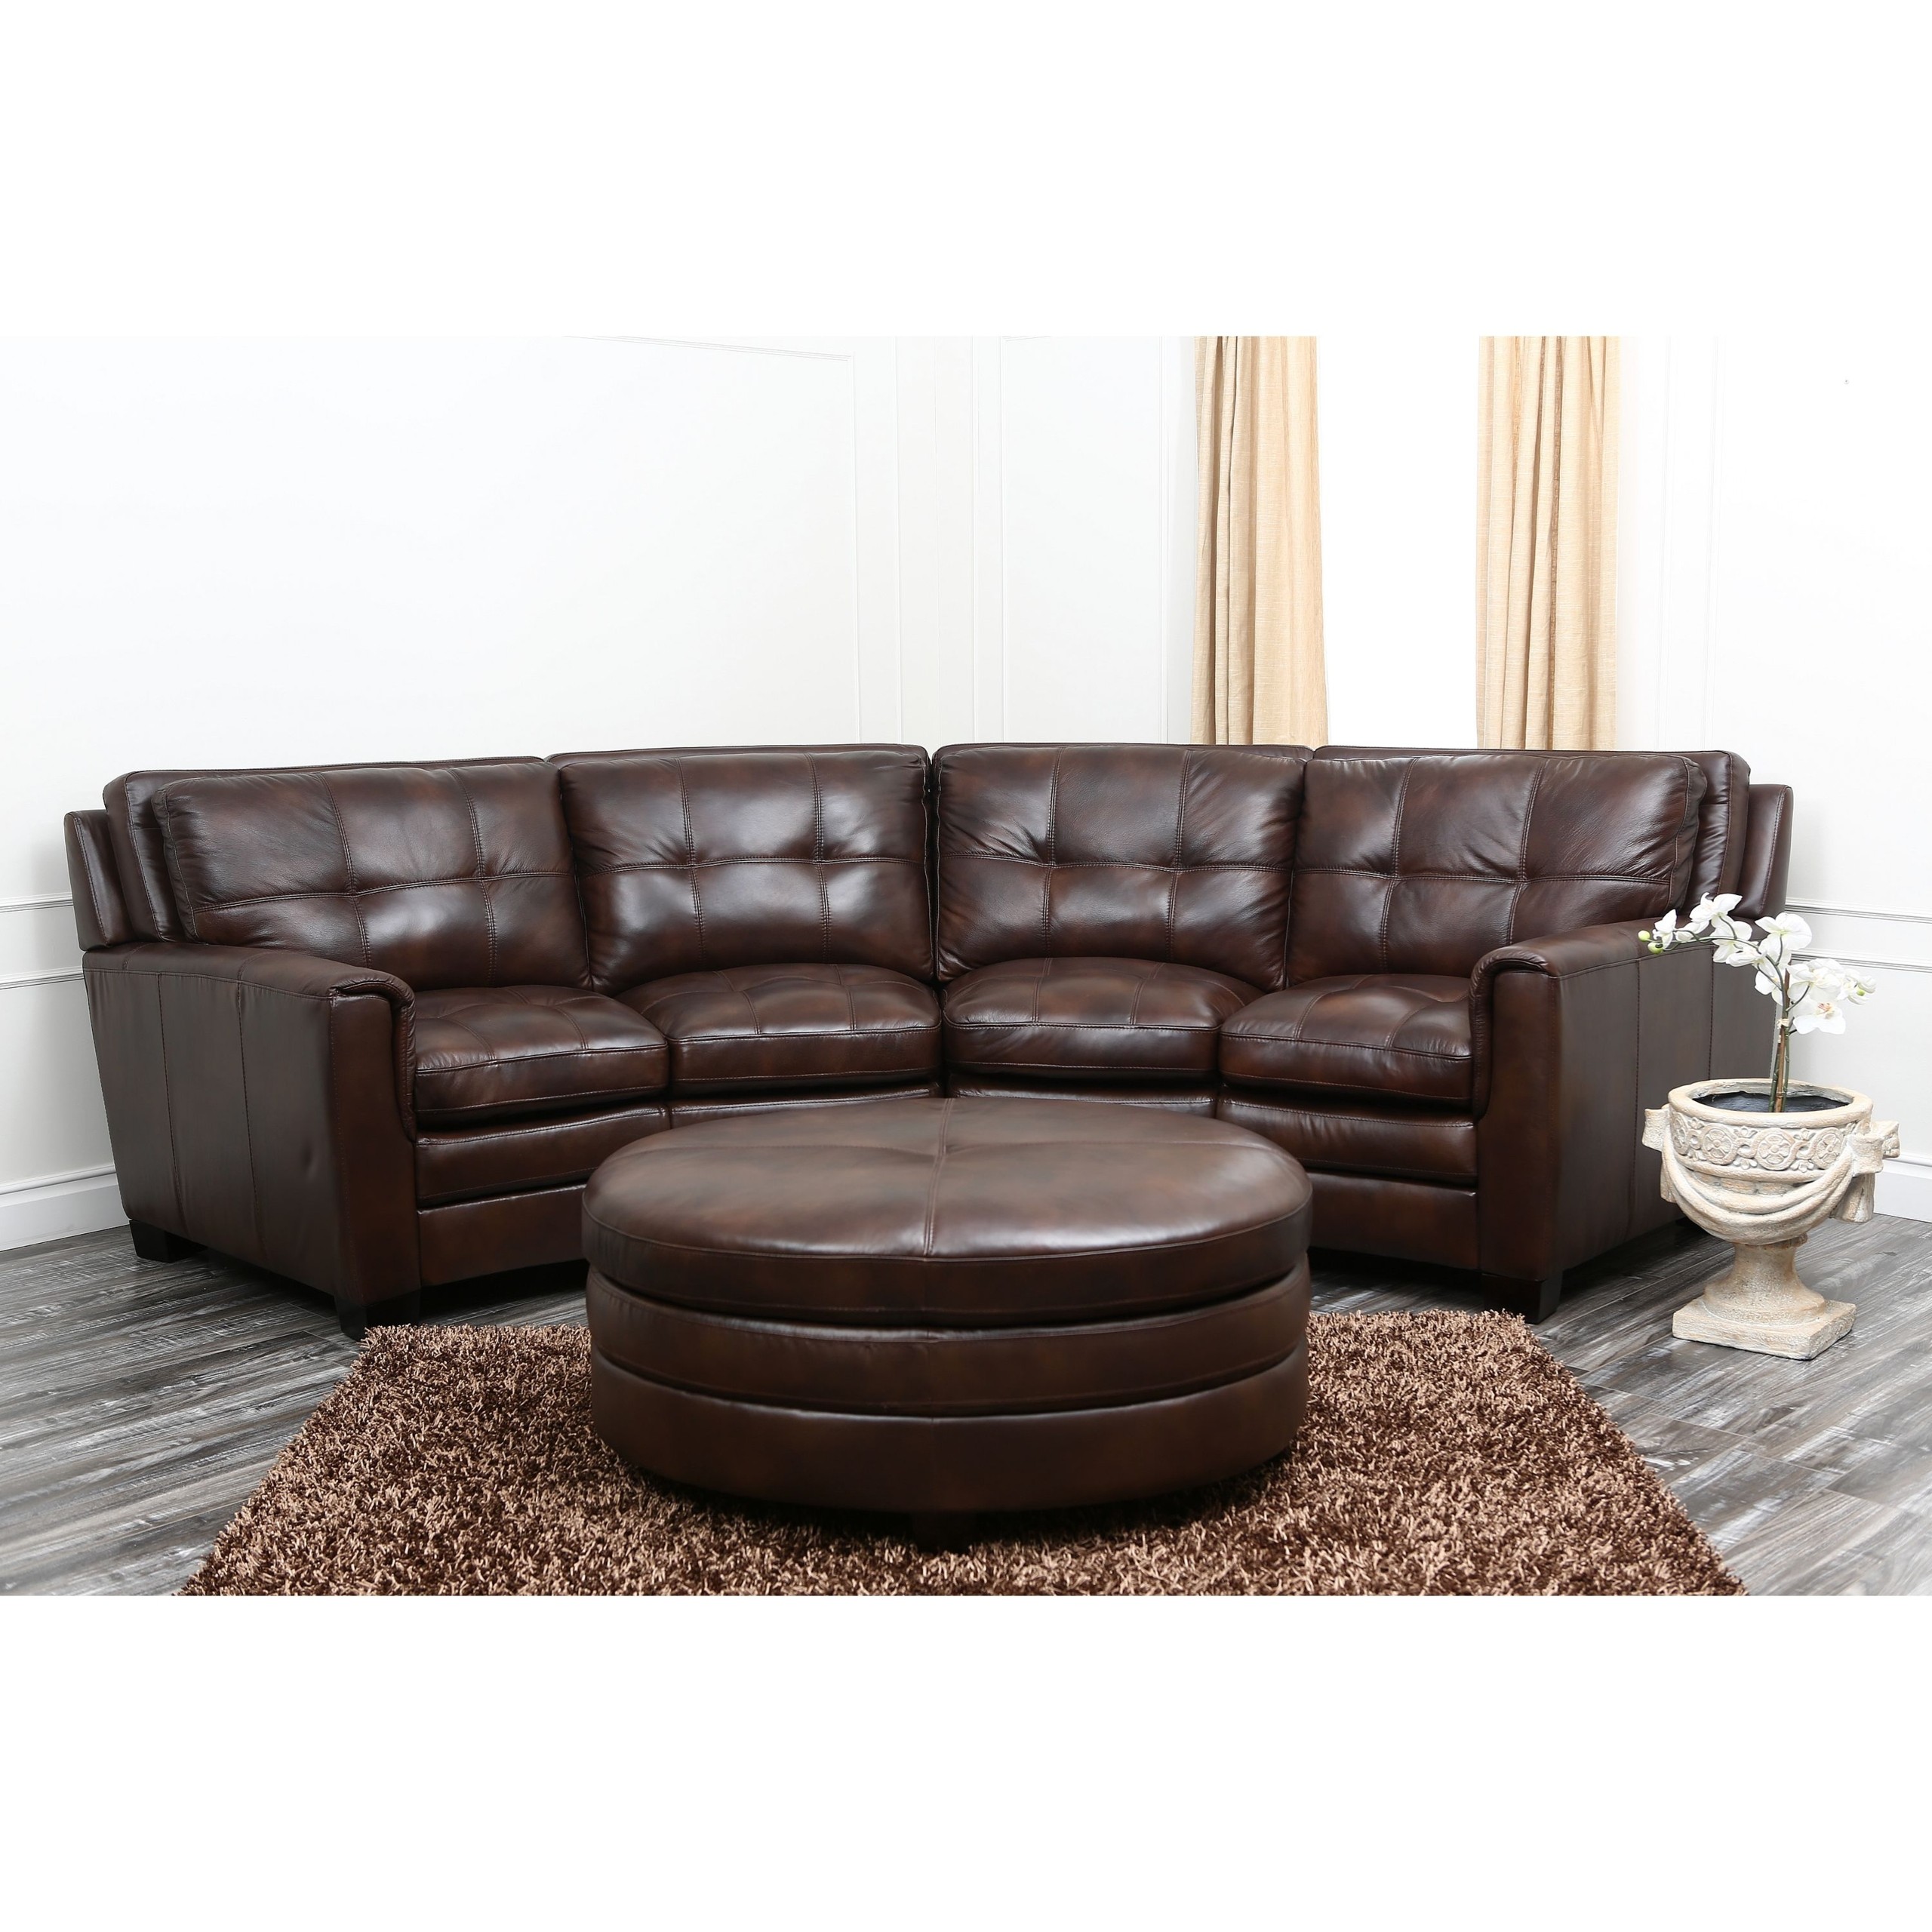 Curved leather sectional 24